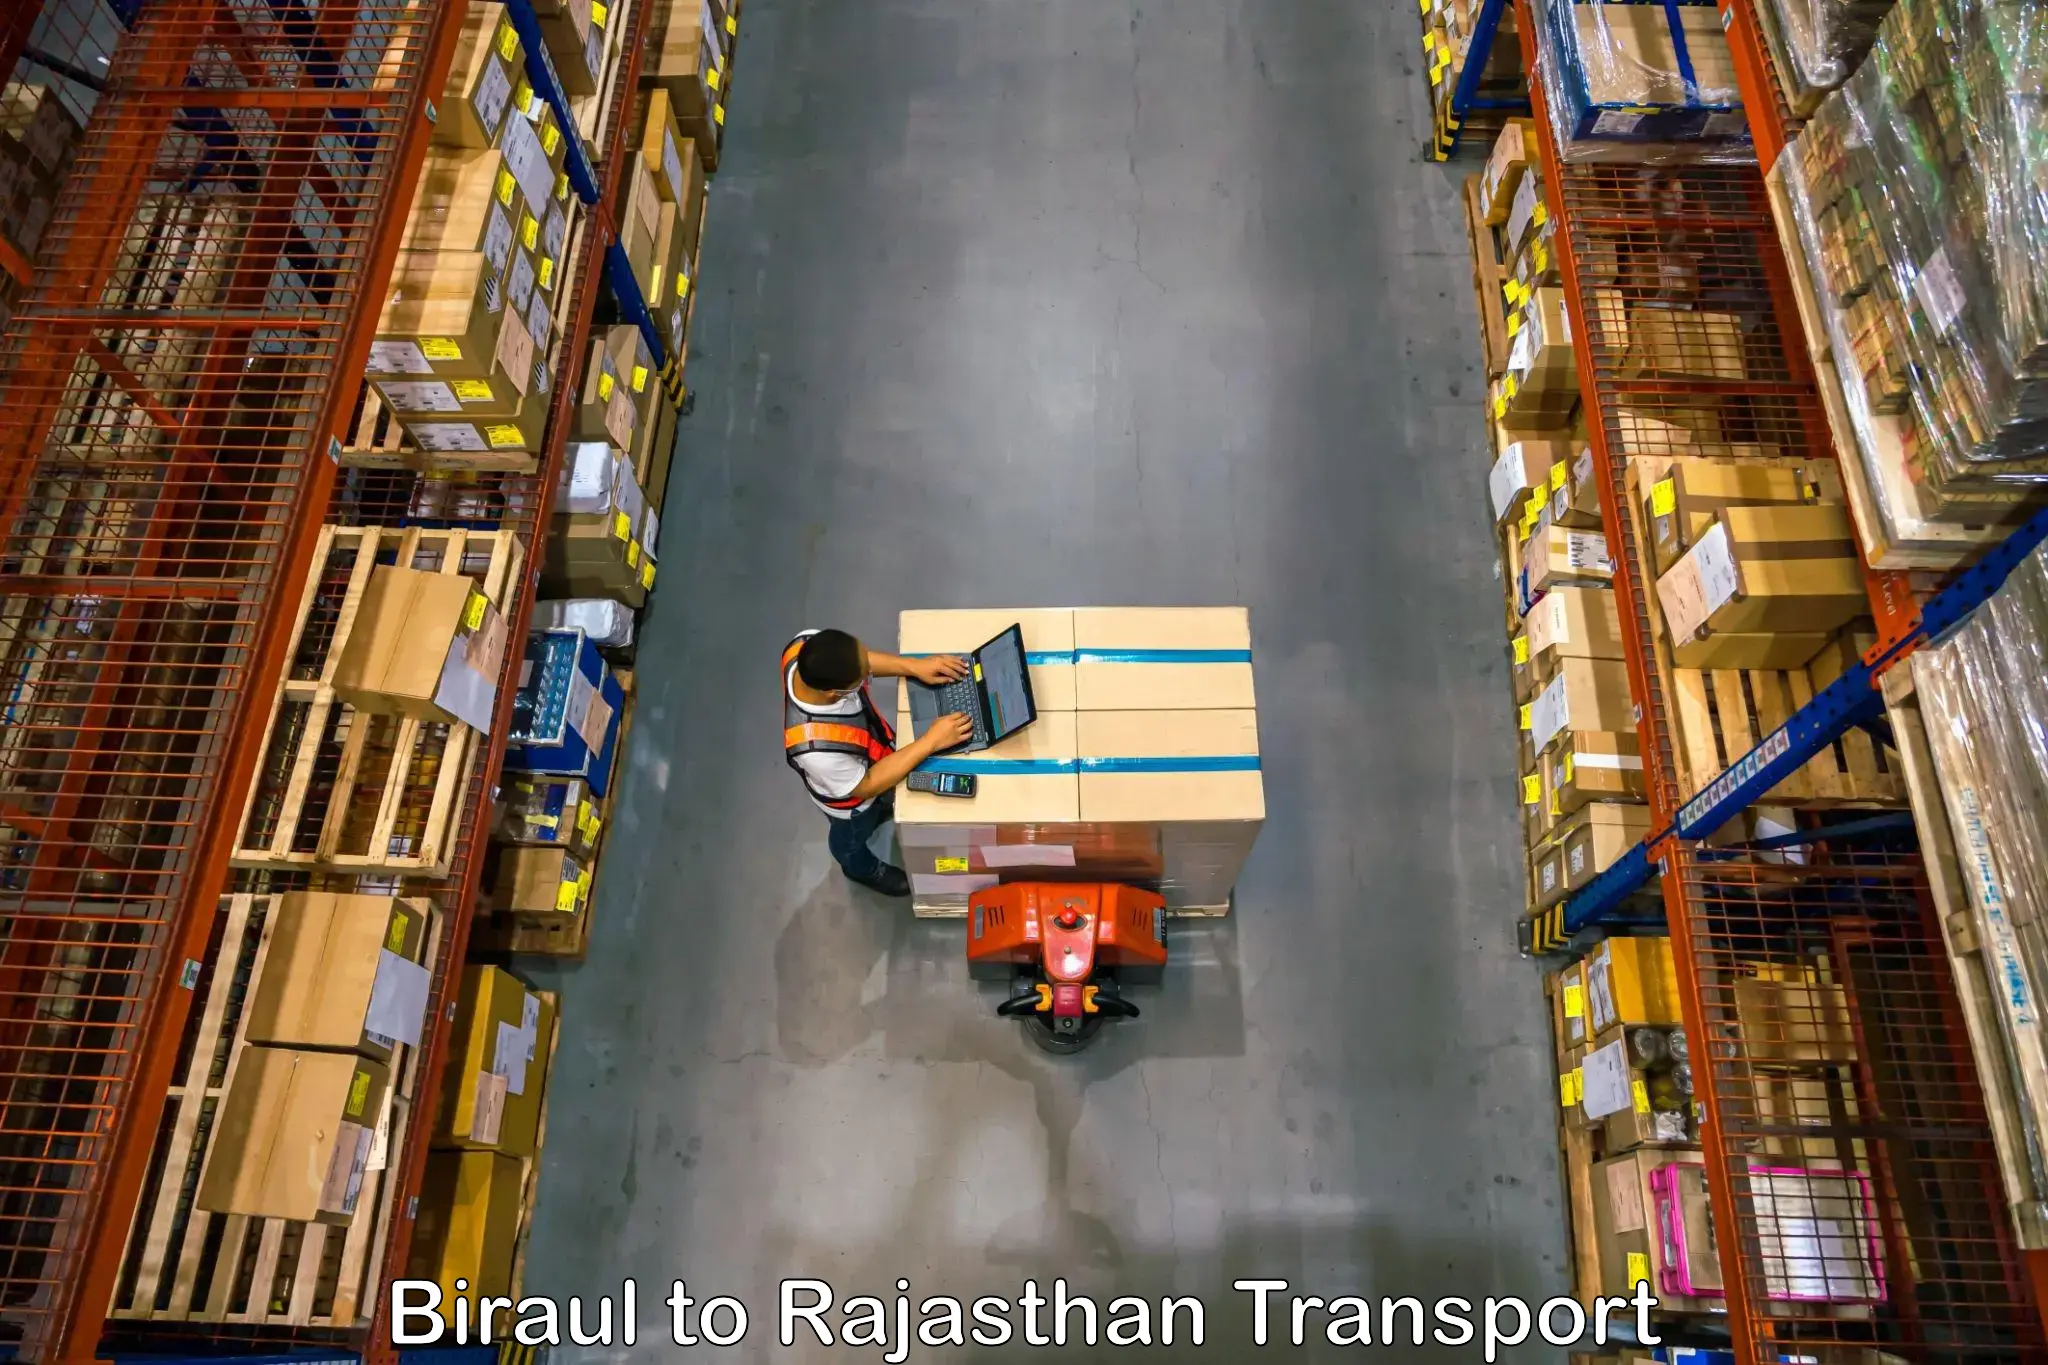 Truck transport companies in India Biraul to Nokha